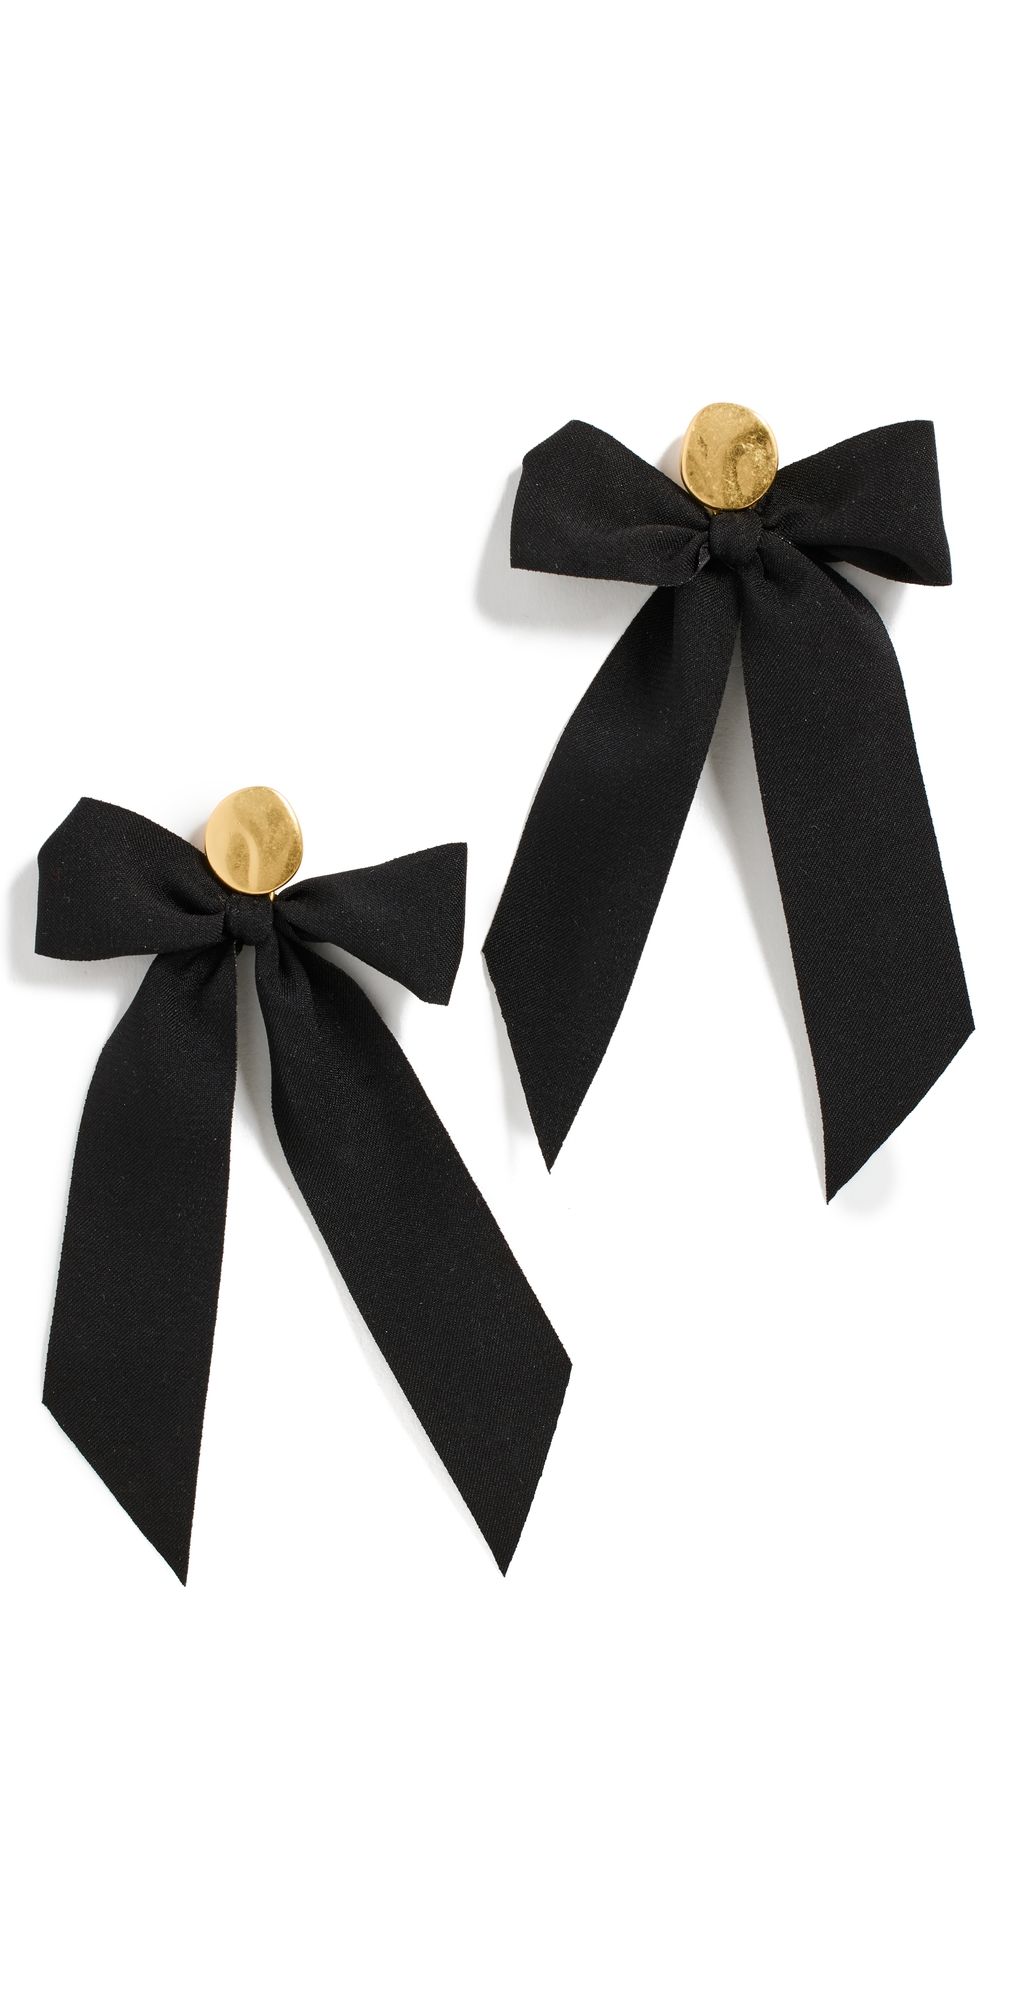 Madewell Satin Bow Statement Earrings | Shopbop